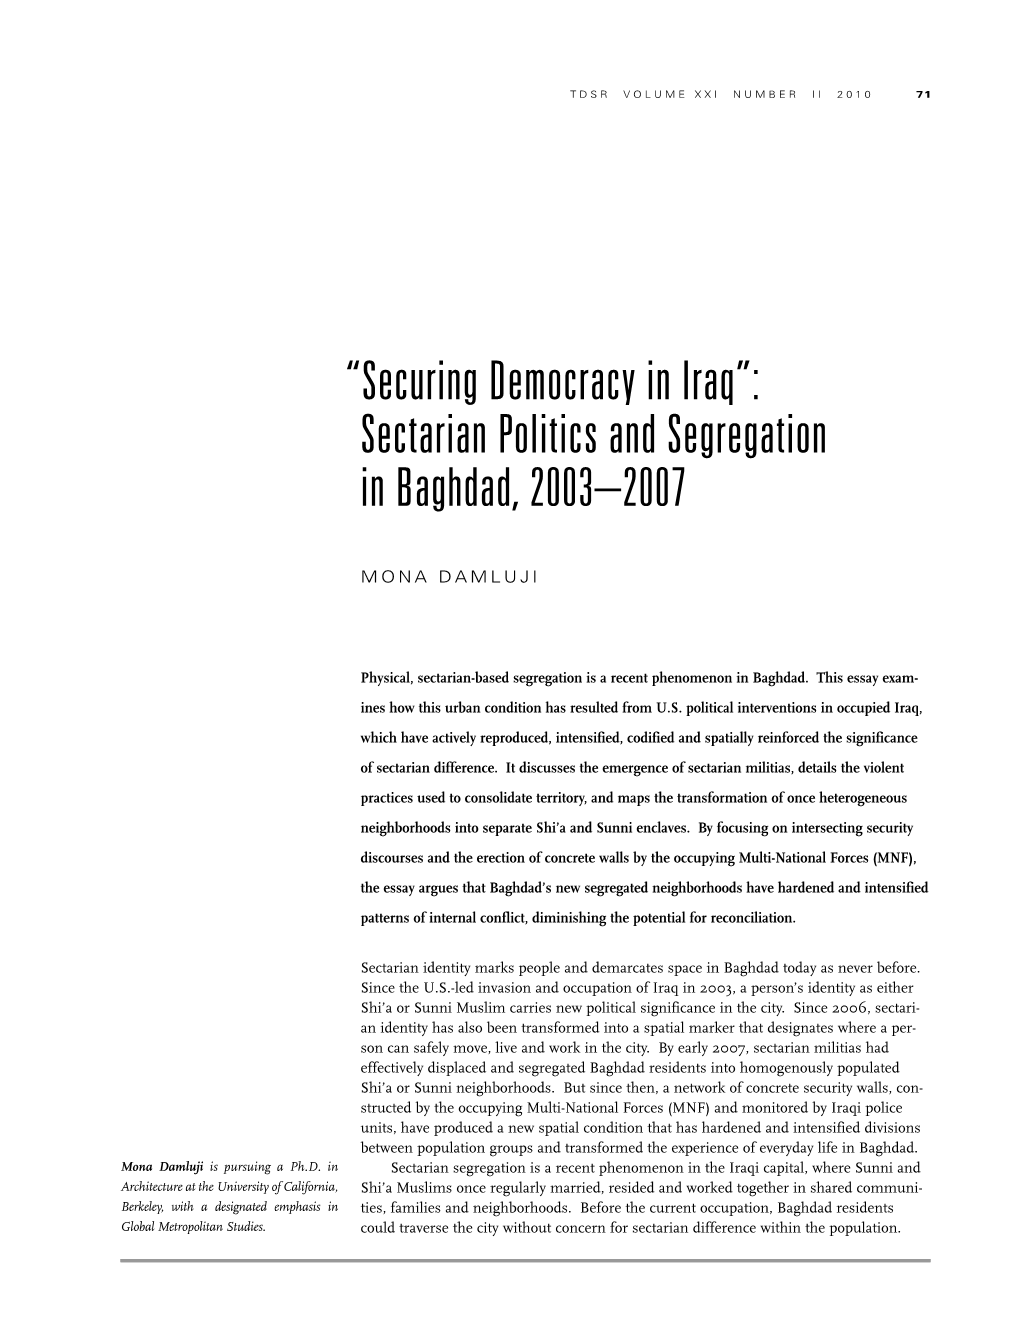 Securing Democracy in Iraq”: Sectarian Politics and Segregation in Baghdad, 2003–2007